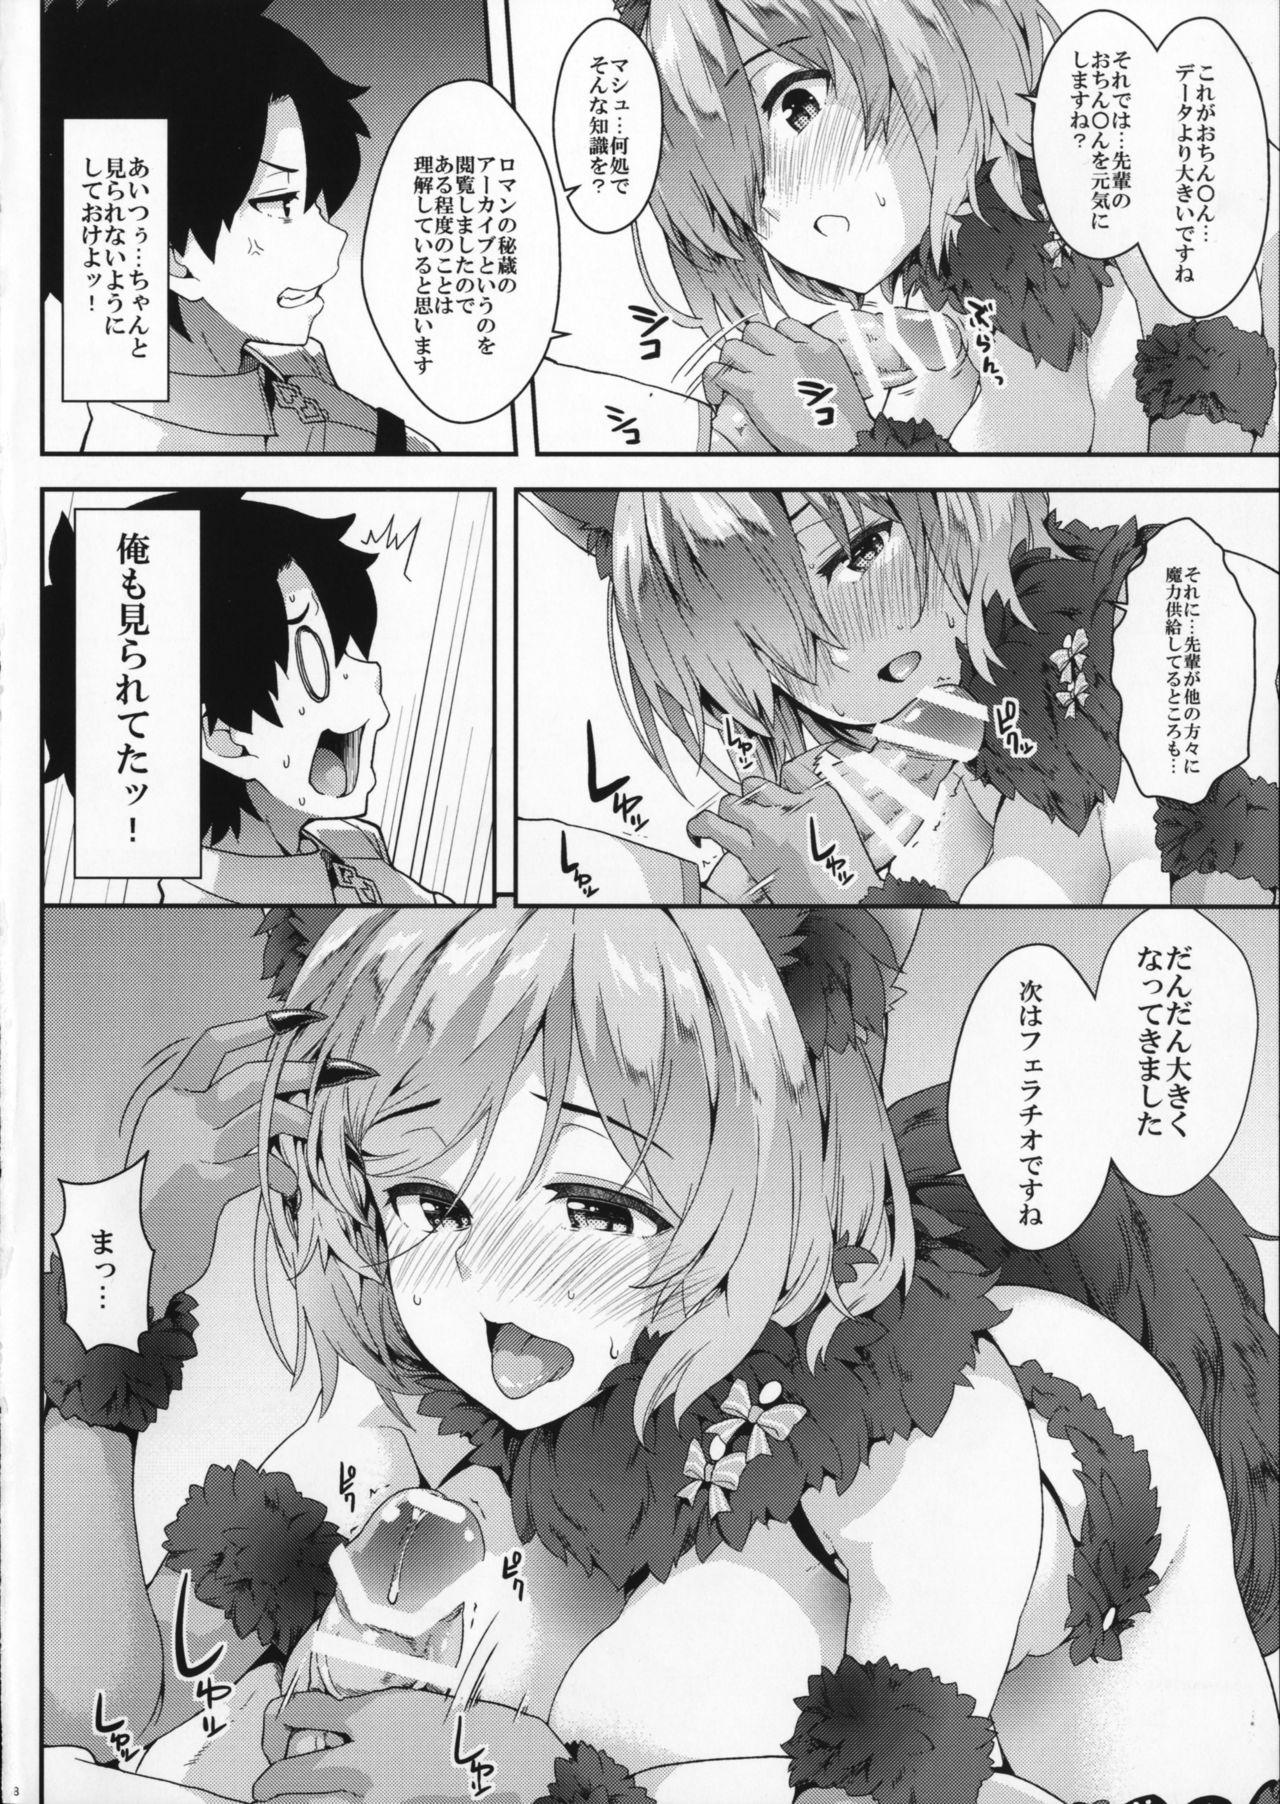 18yo Why am I jealous of you? - Fate grand order Lez Fuck - Page 7